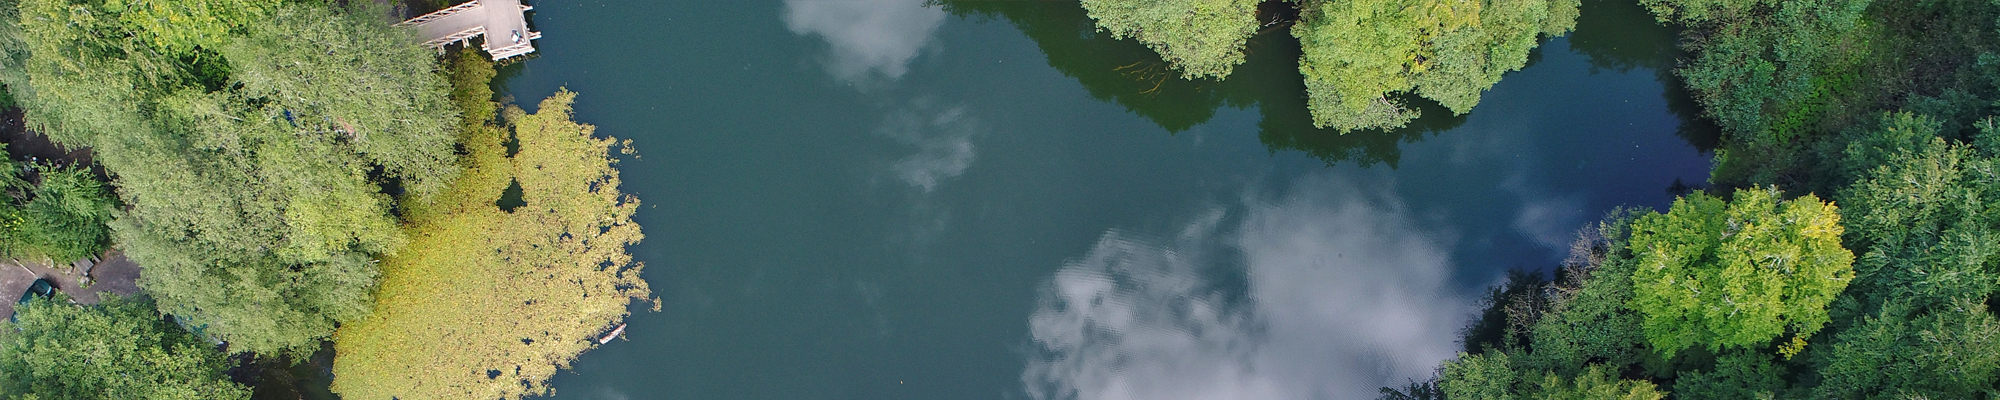 aerial view of dock on water with trees